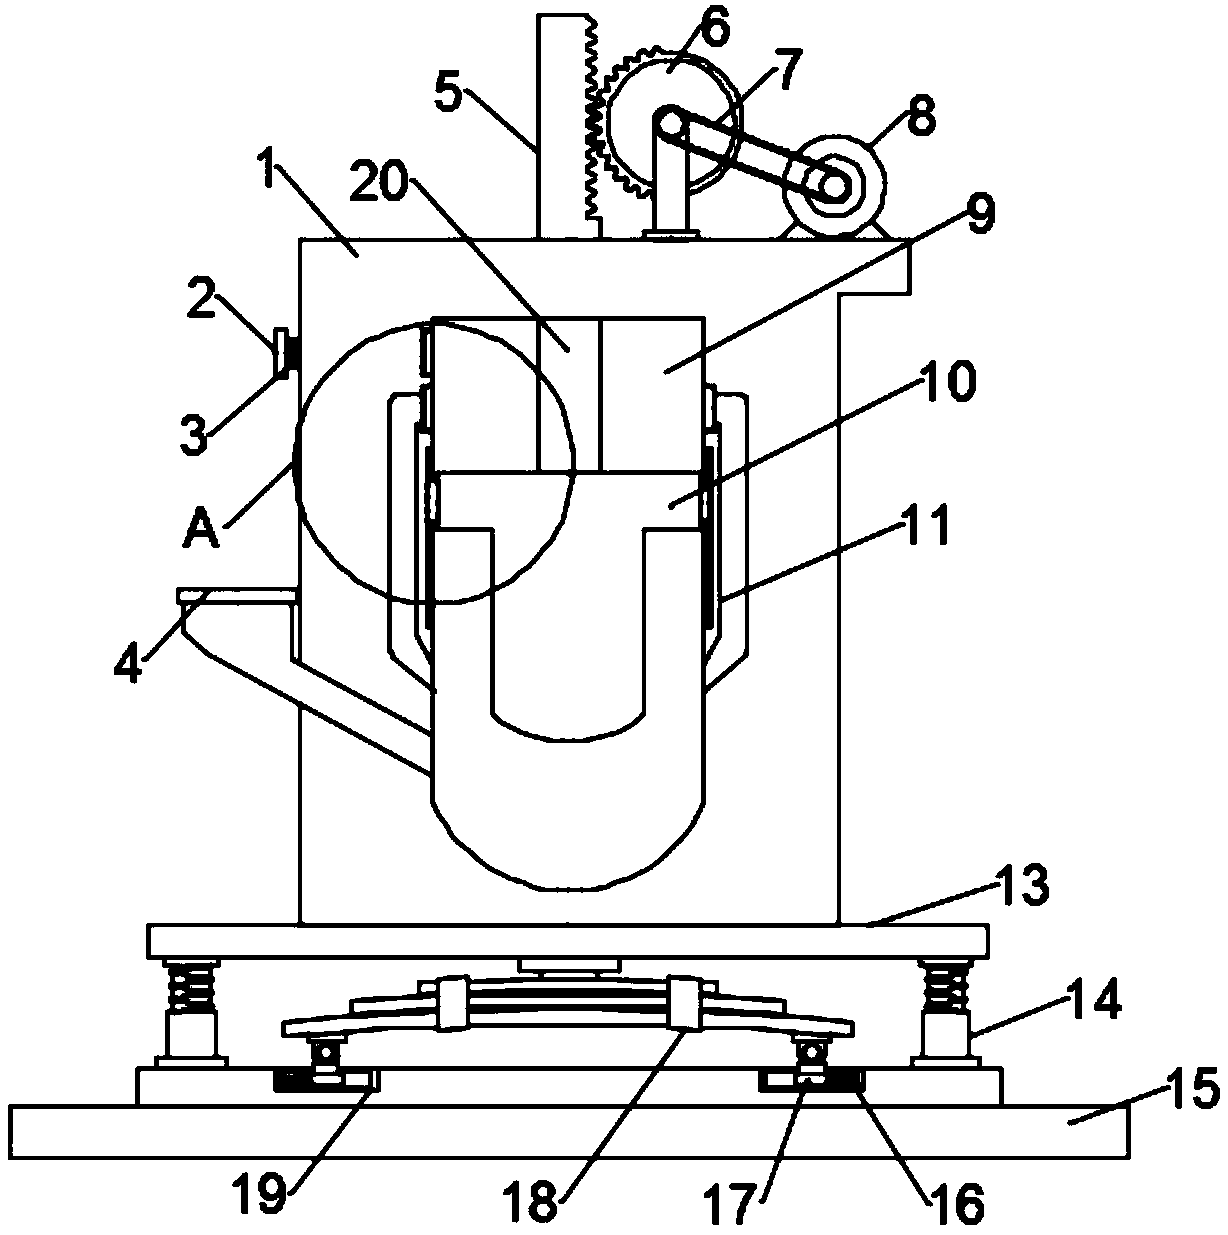 Dry red pepper mashing device for food processing